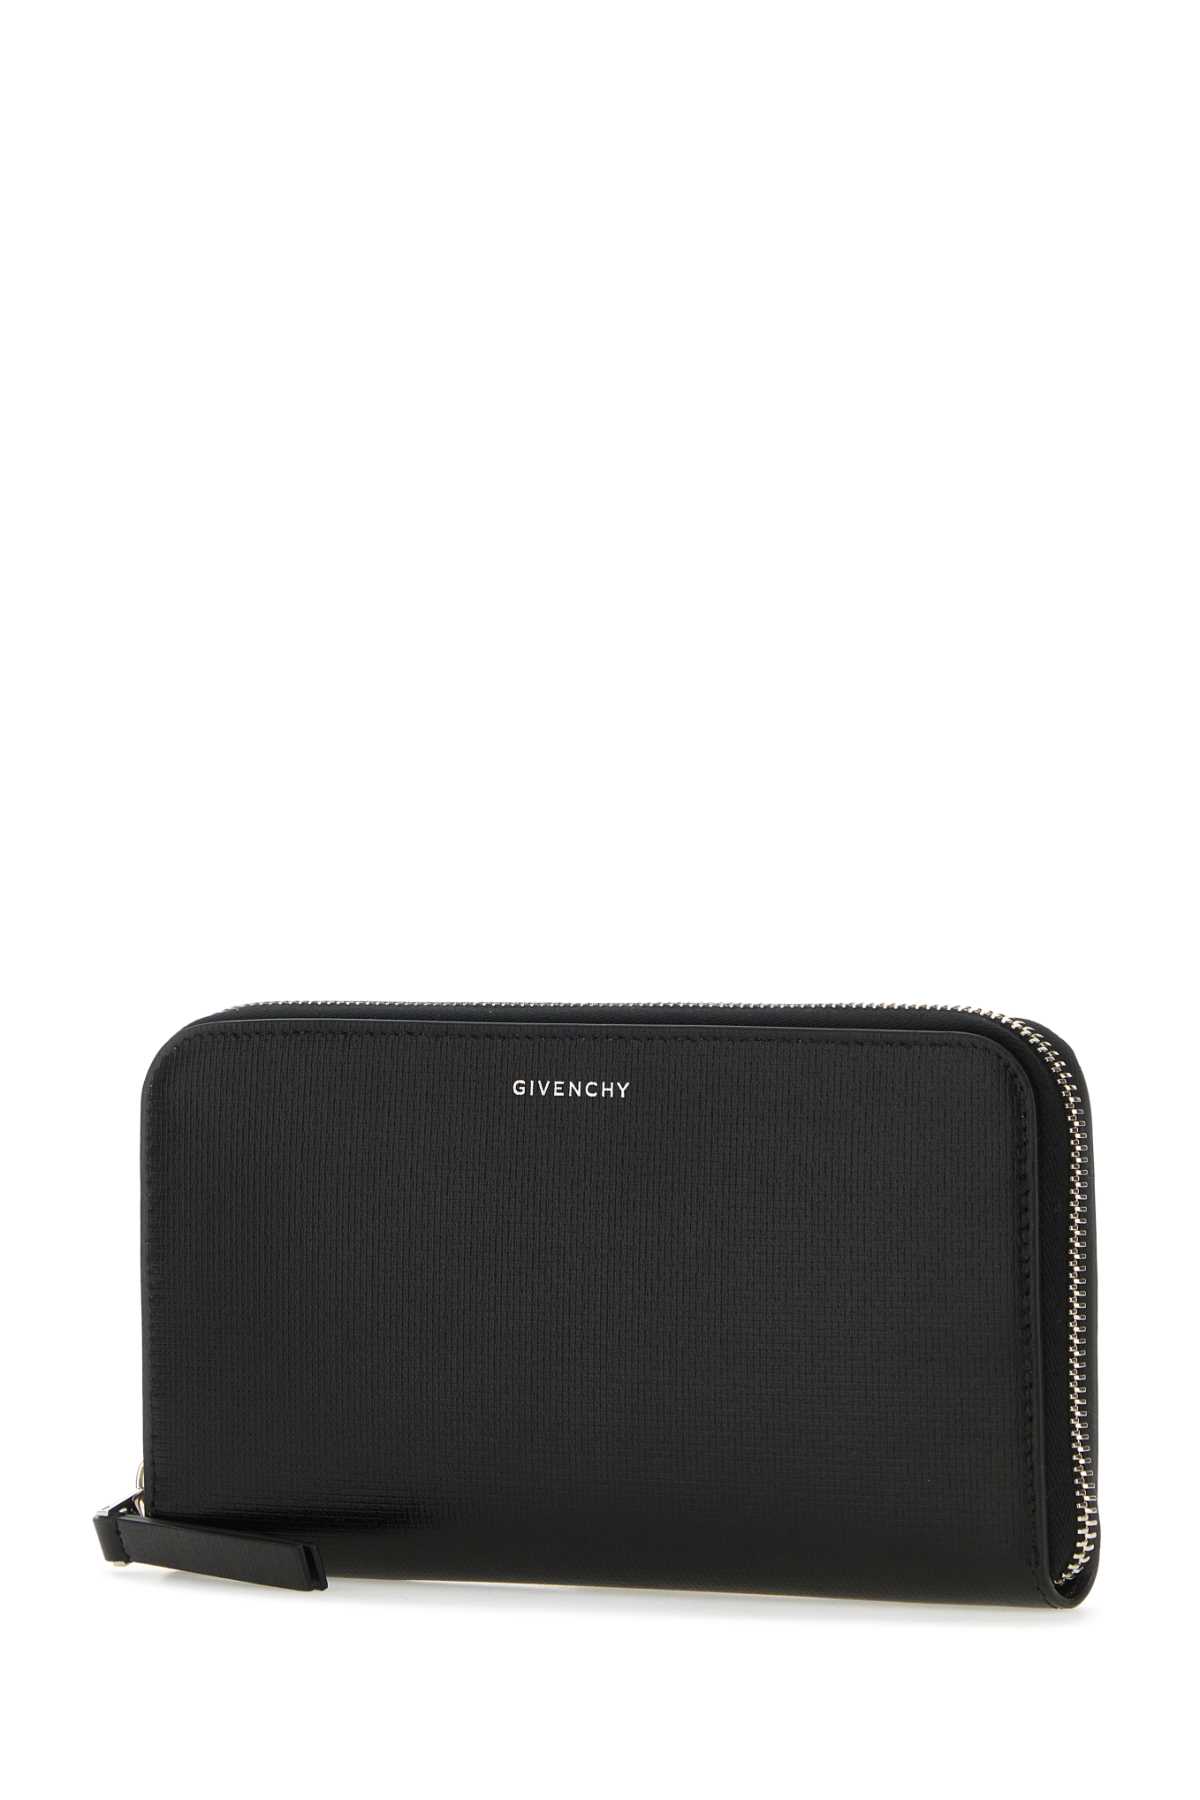 Shop Givenchy Black Leather Wallet